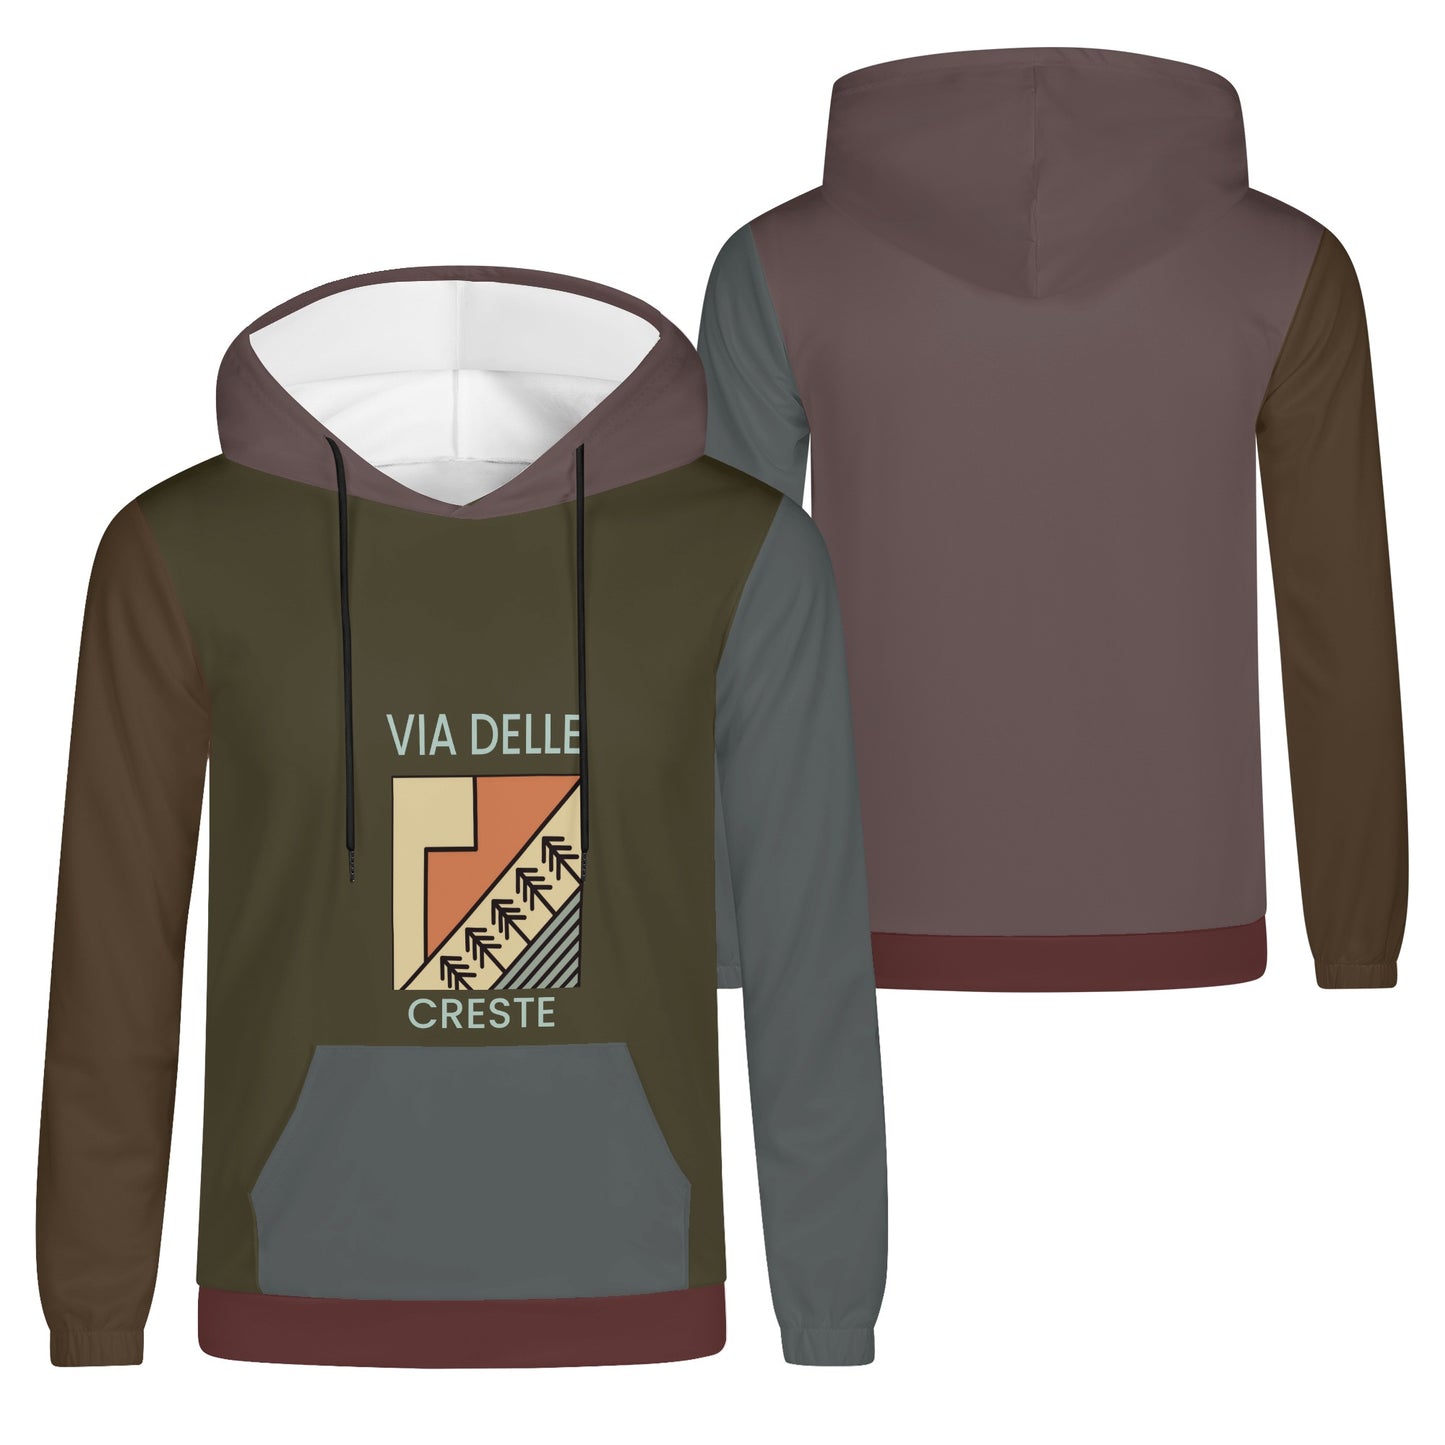 Pure Nature Project Via delle Creste Mens Lightweight All Over Printing Hoodie Sweatshirt